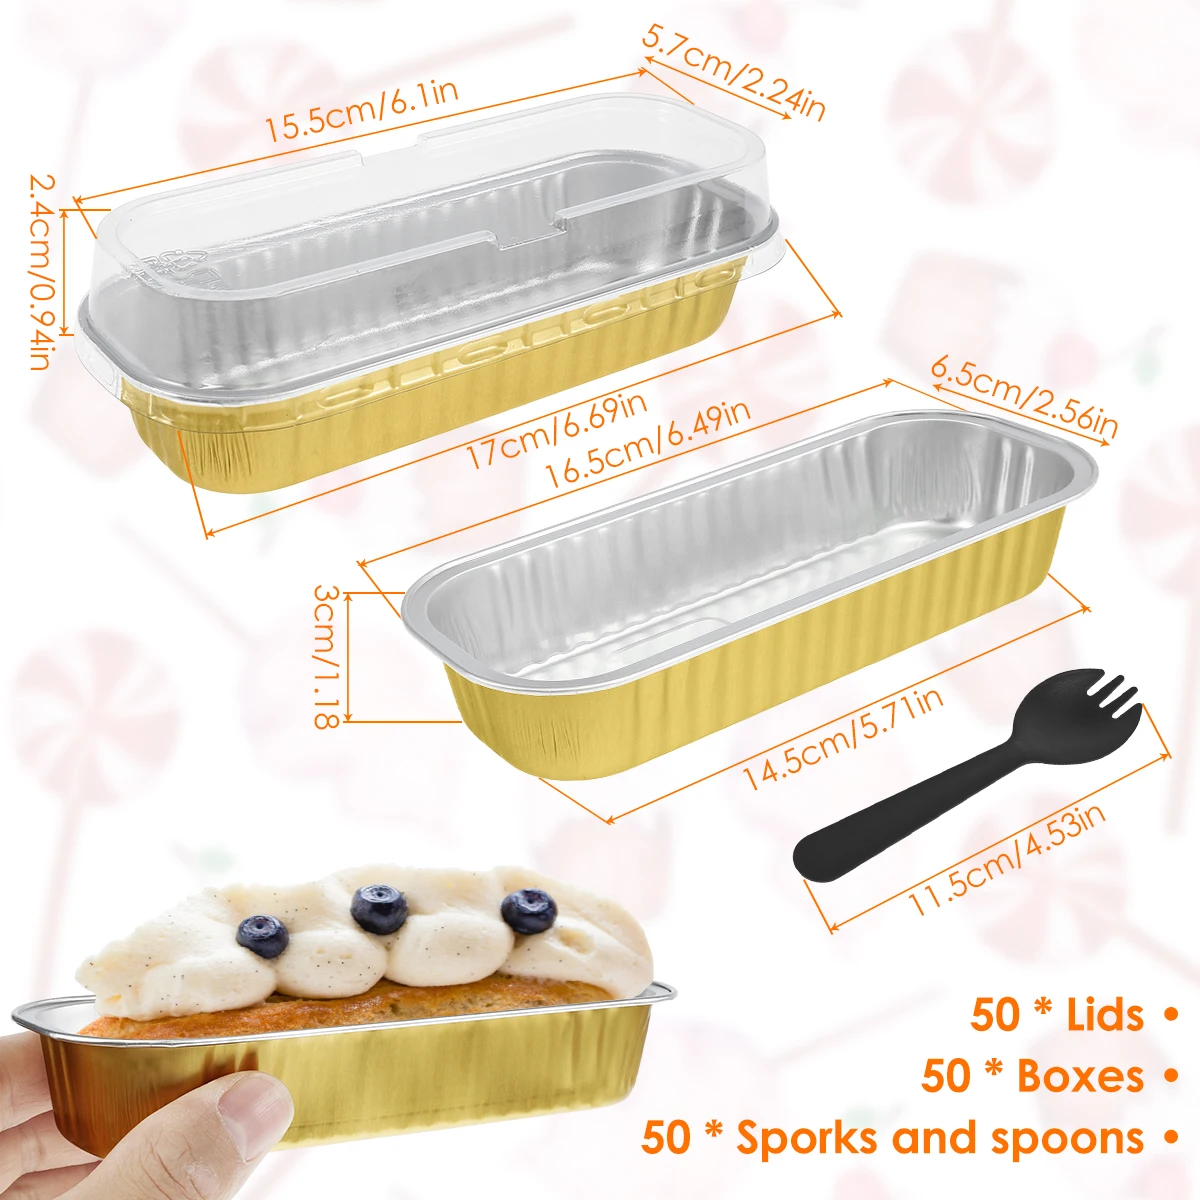 https://ae01.alicdn.com/kf/S1e643891d6284ef49064c579d26670e51/50pcs-Aluminum-Foil-With-Lids-Tins-Liners-Muffin-Disposable-Cheesecake-Mini-Loaf-Baking-Pan-Cupcake-Flans.jpg